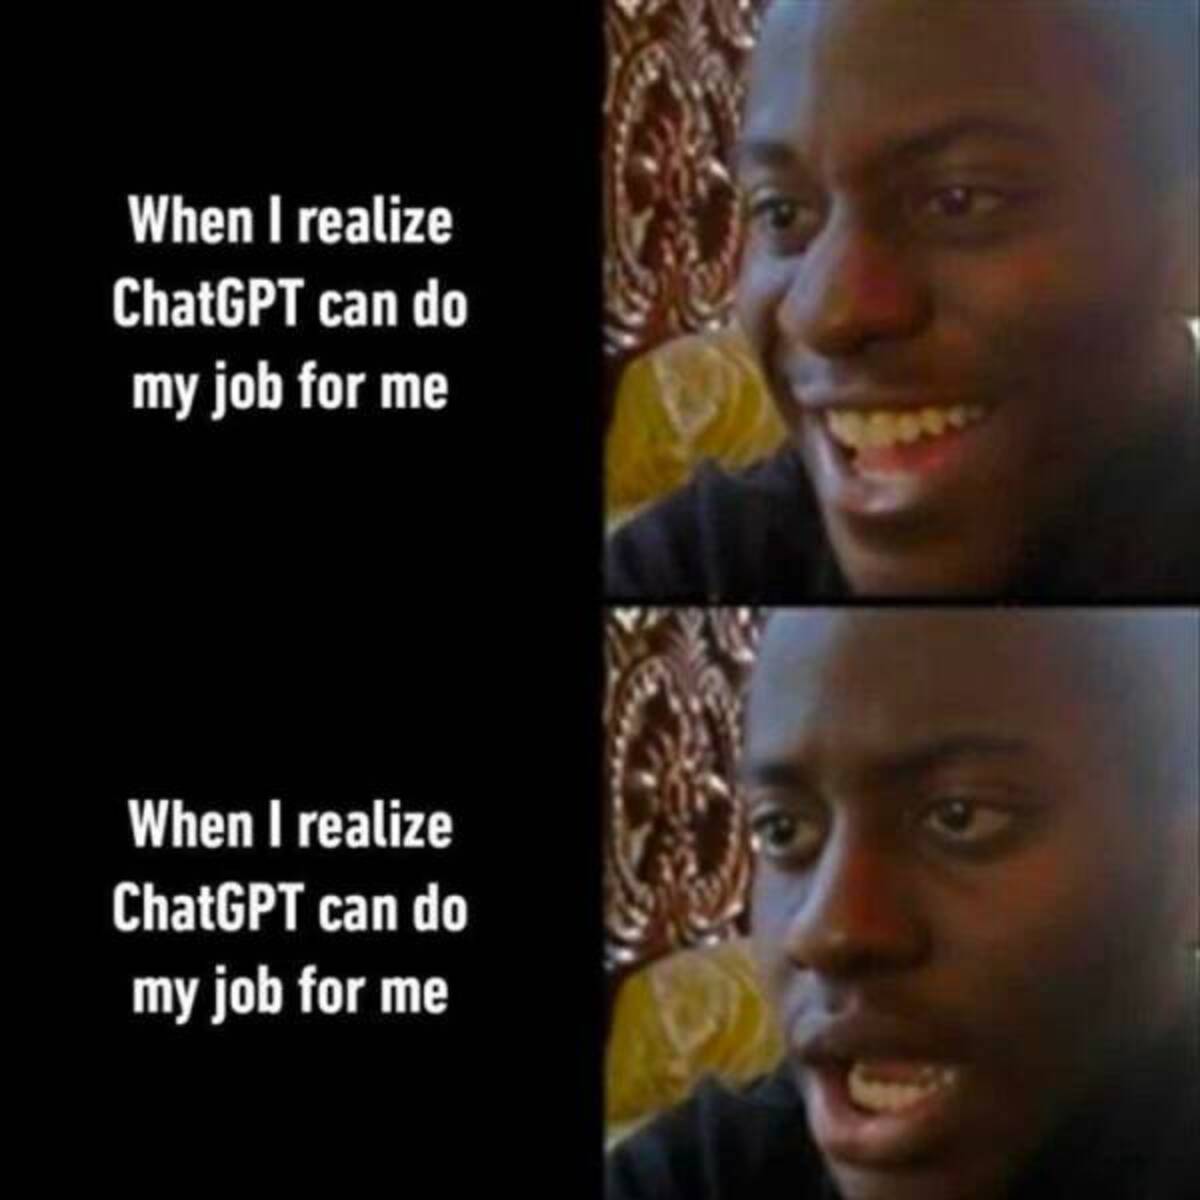 chatgpt meme - When I realize ChatGPT can do my job for me When I realize ChatGPT can do my job for me